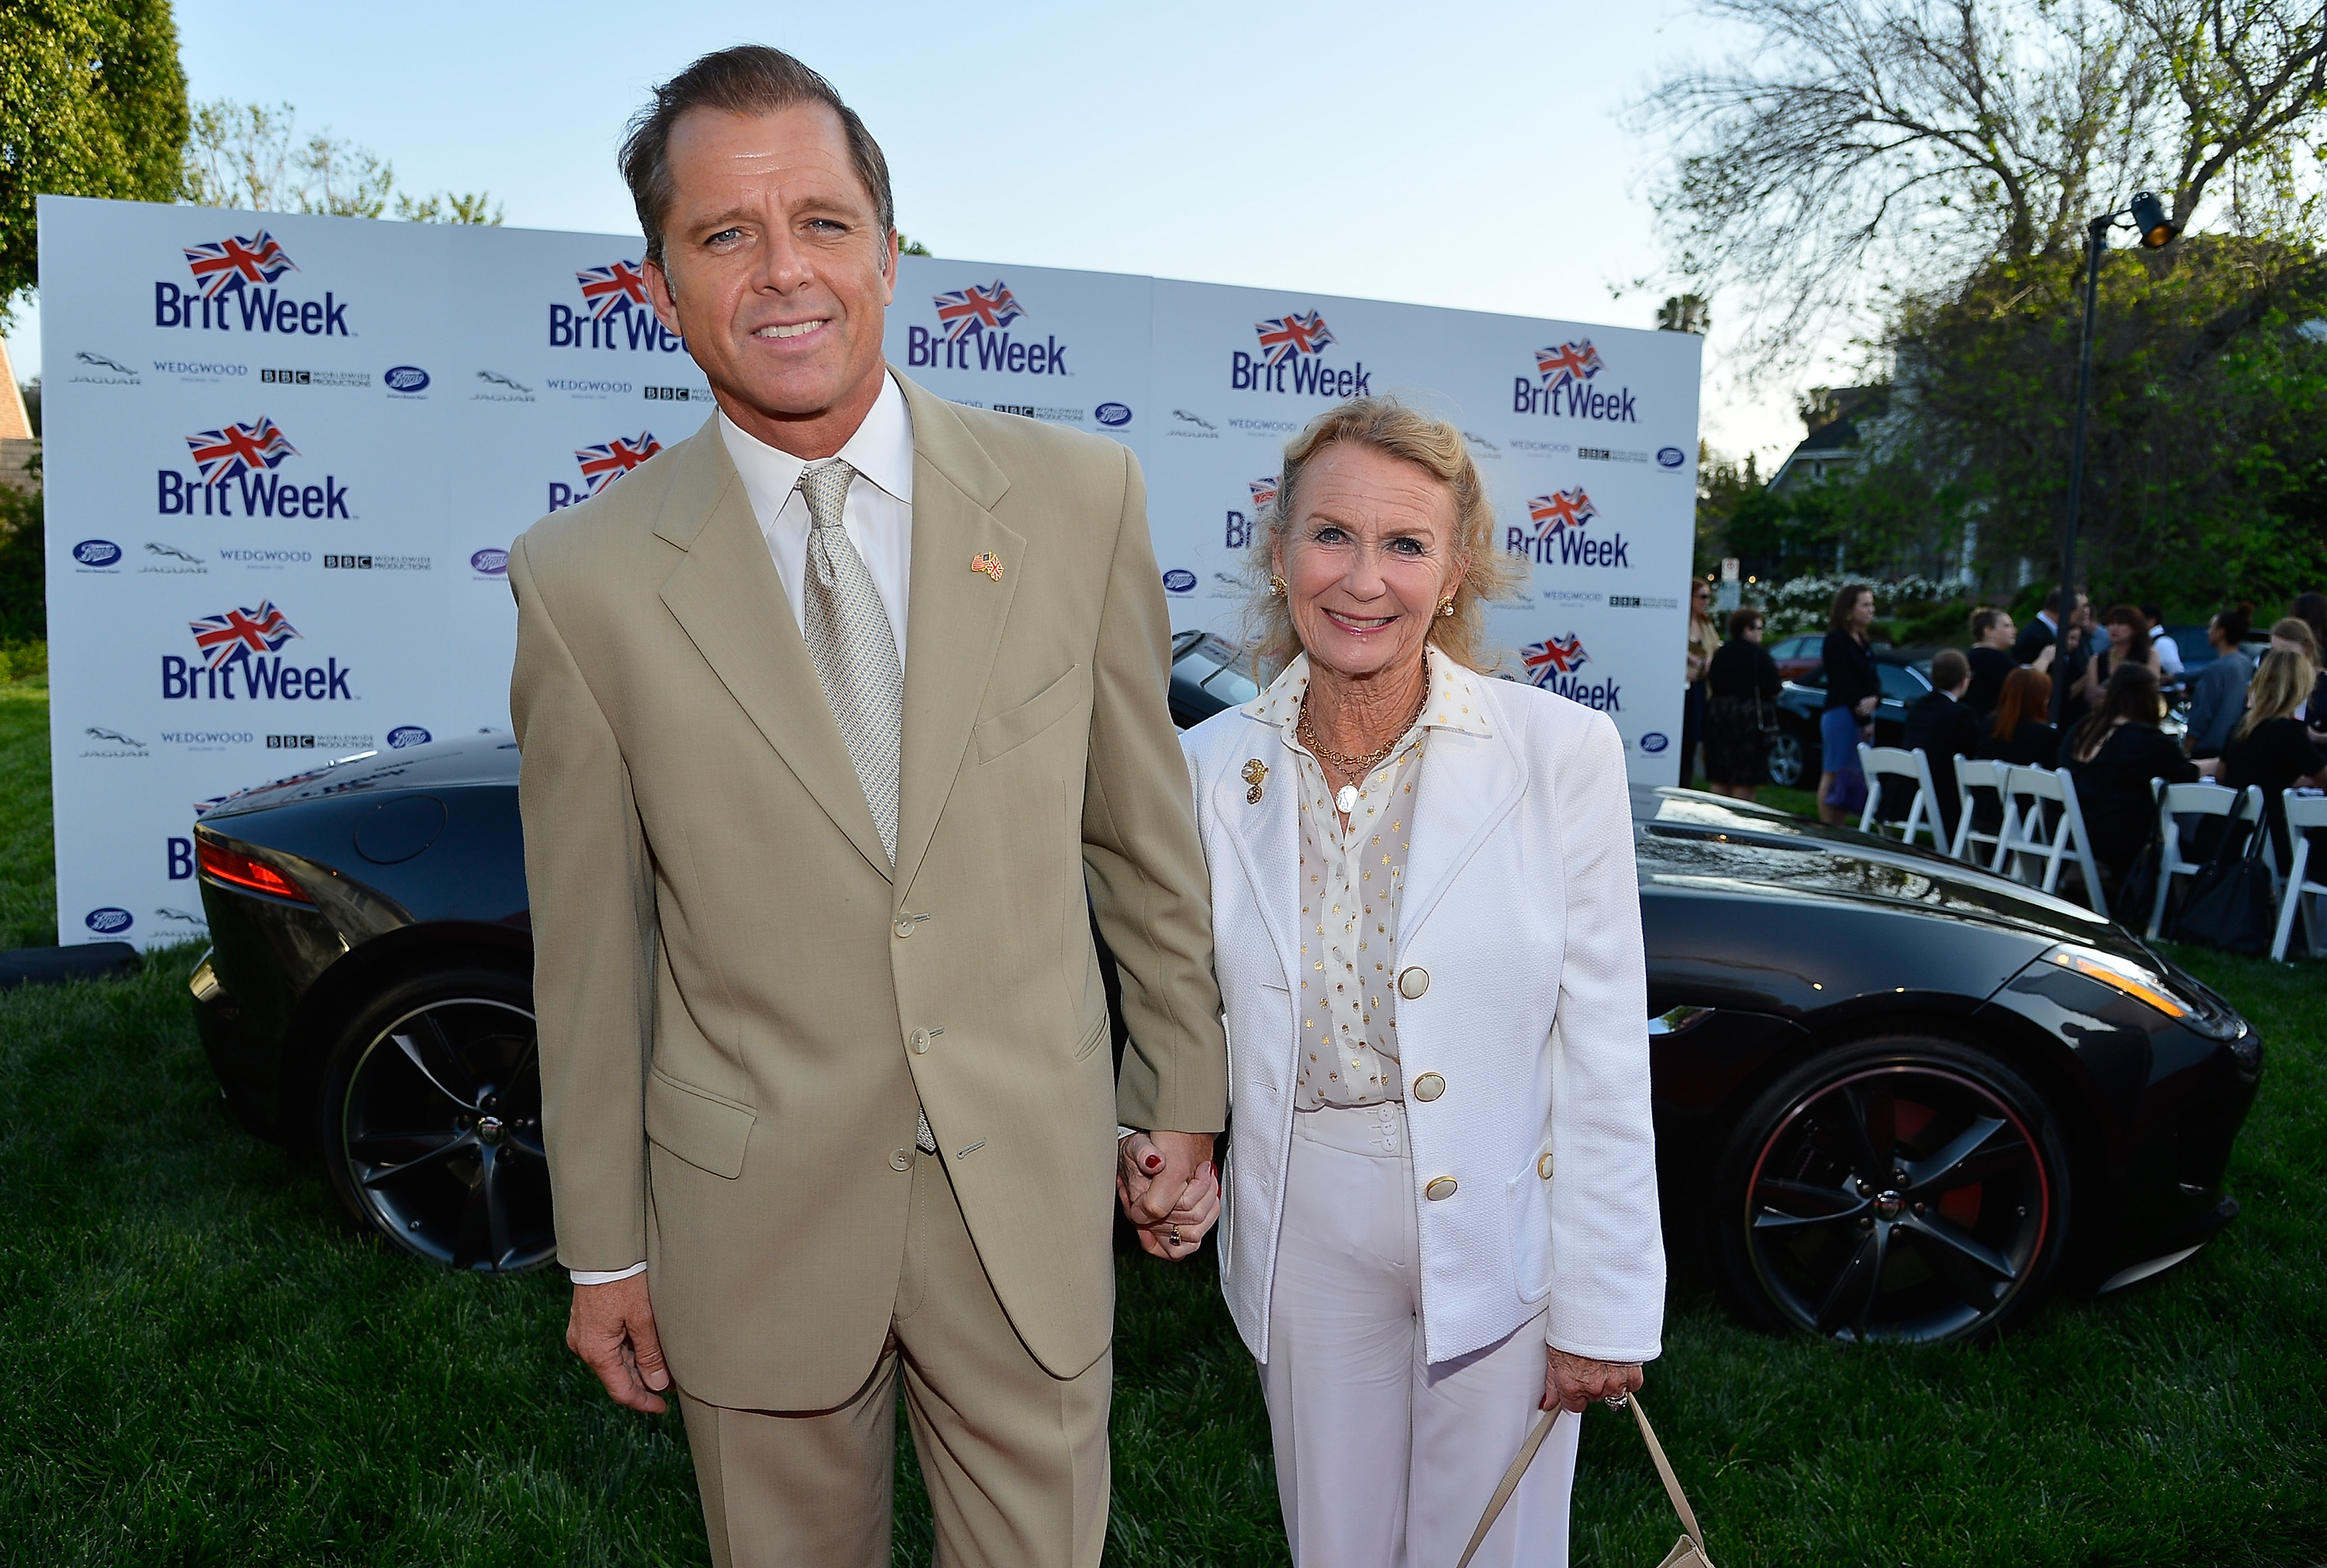 Max Caulfield and Juliet Mills attend the launch of the Seventh Annual BritWeek Festival "A Salute To Old Hollywood" on April 23, 2013, in Los Angeles, California. | Source: Getty Images